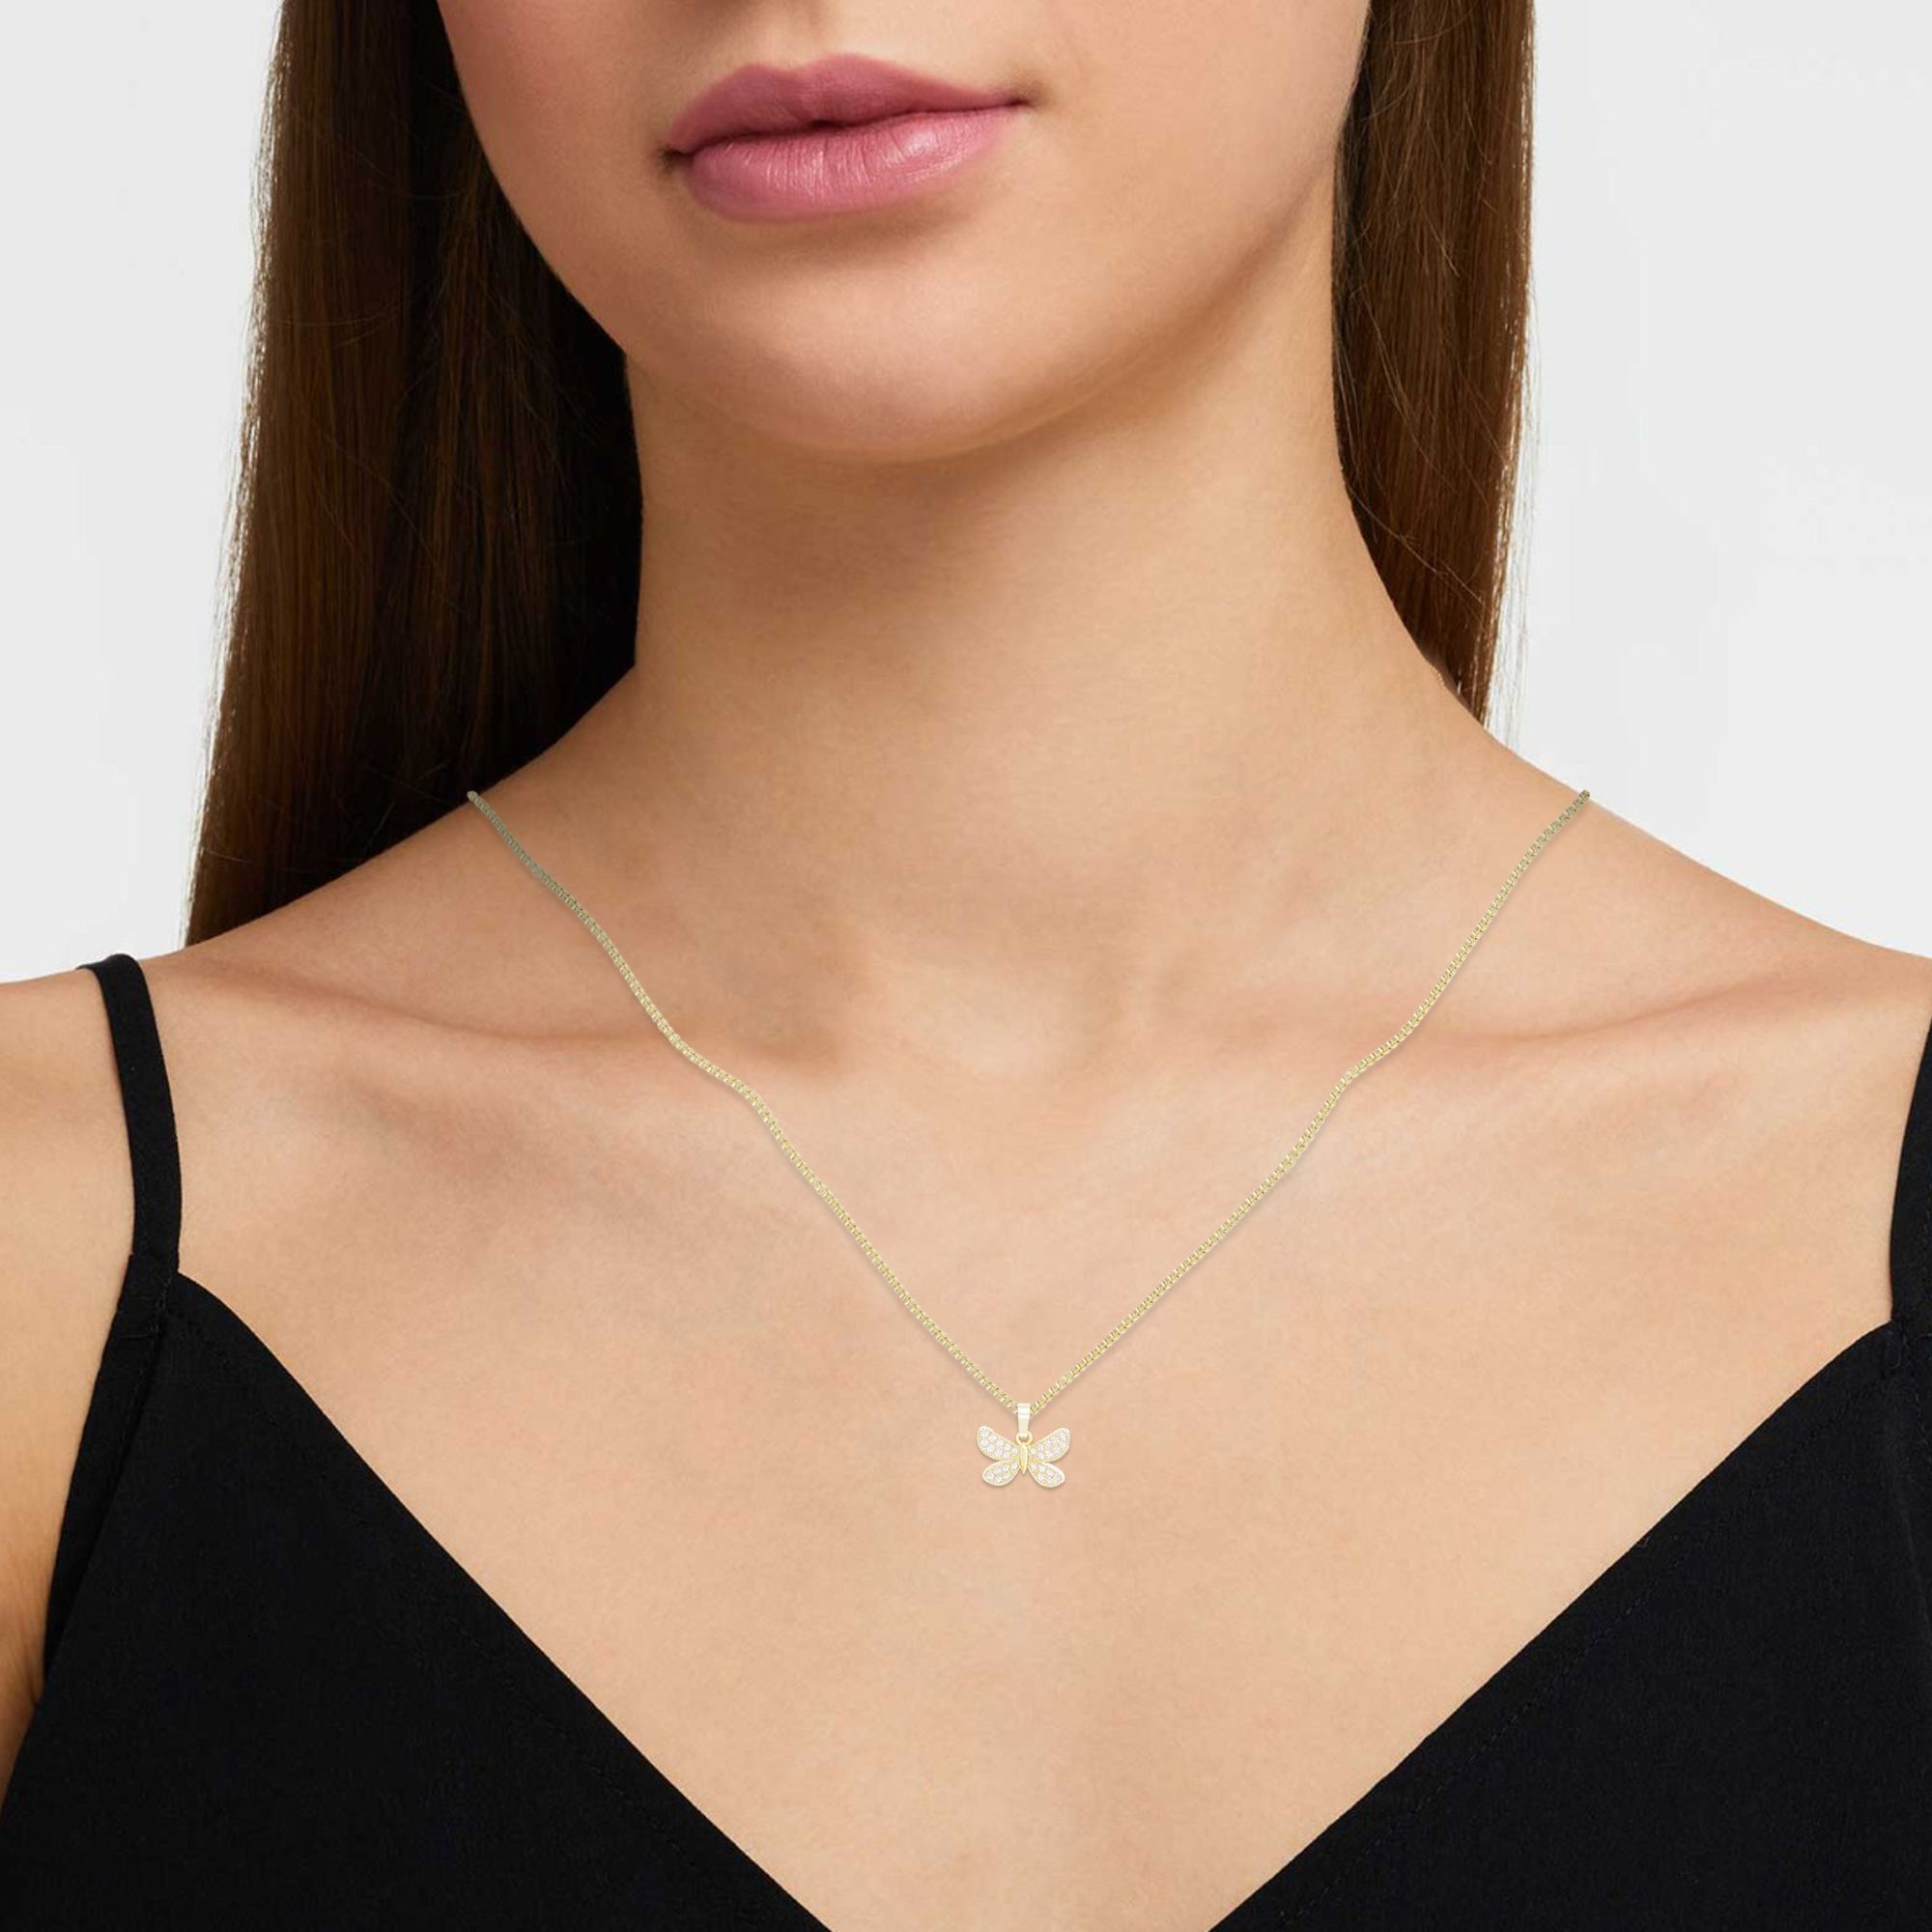 Morning Butterfly Cubic Zirconia Pendant With Necklace Set 14K Gold Filled